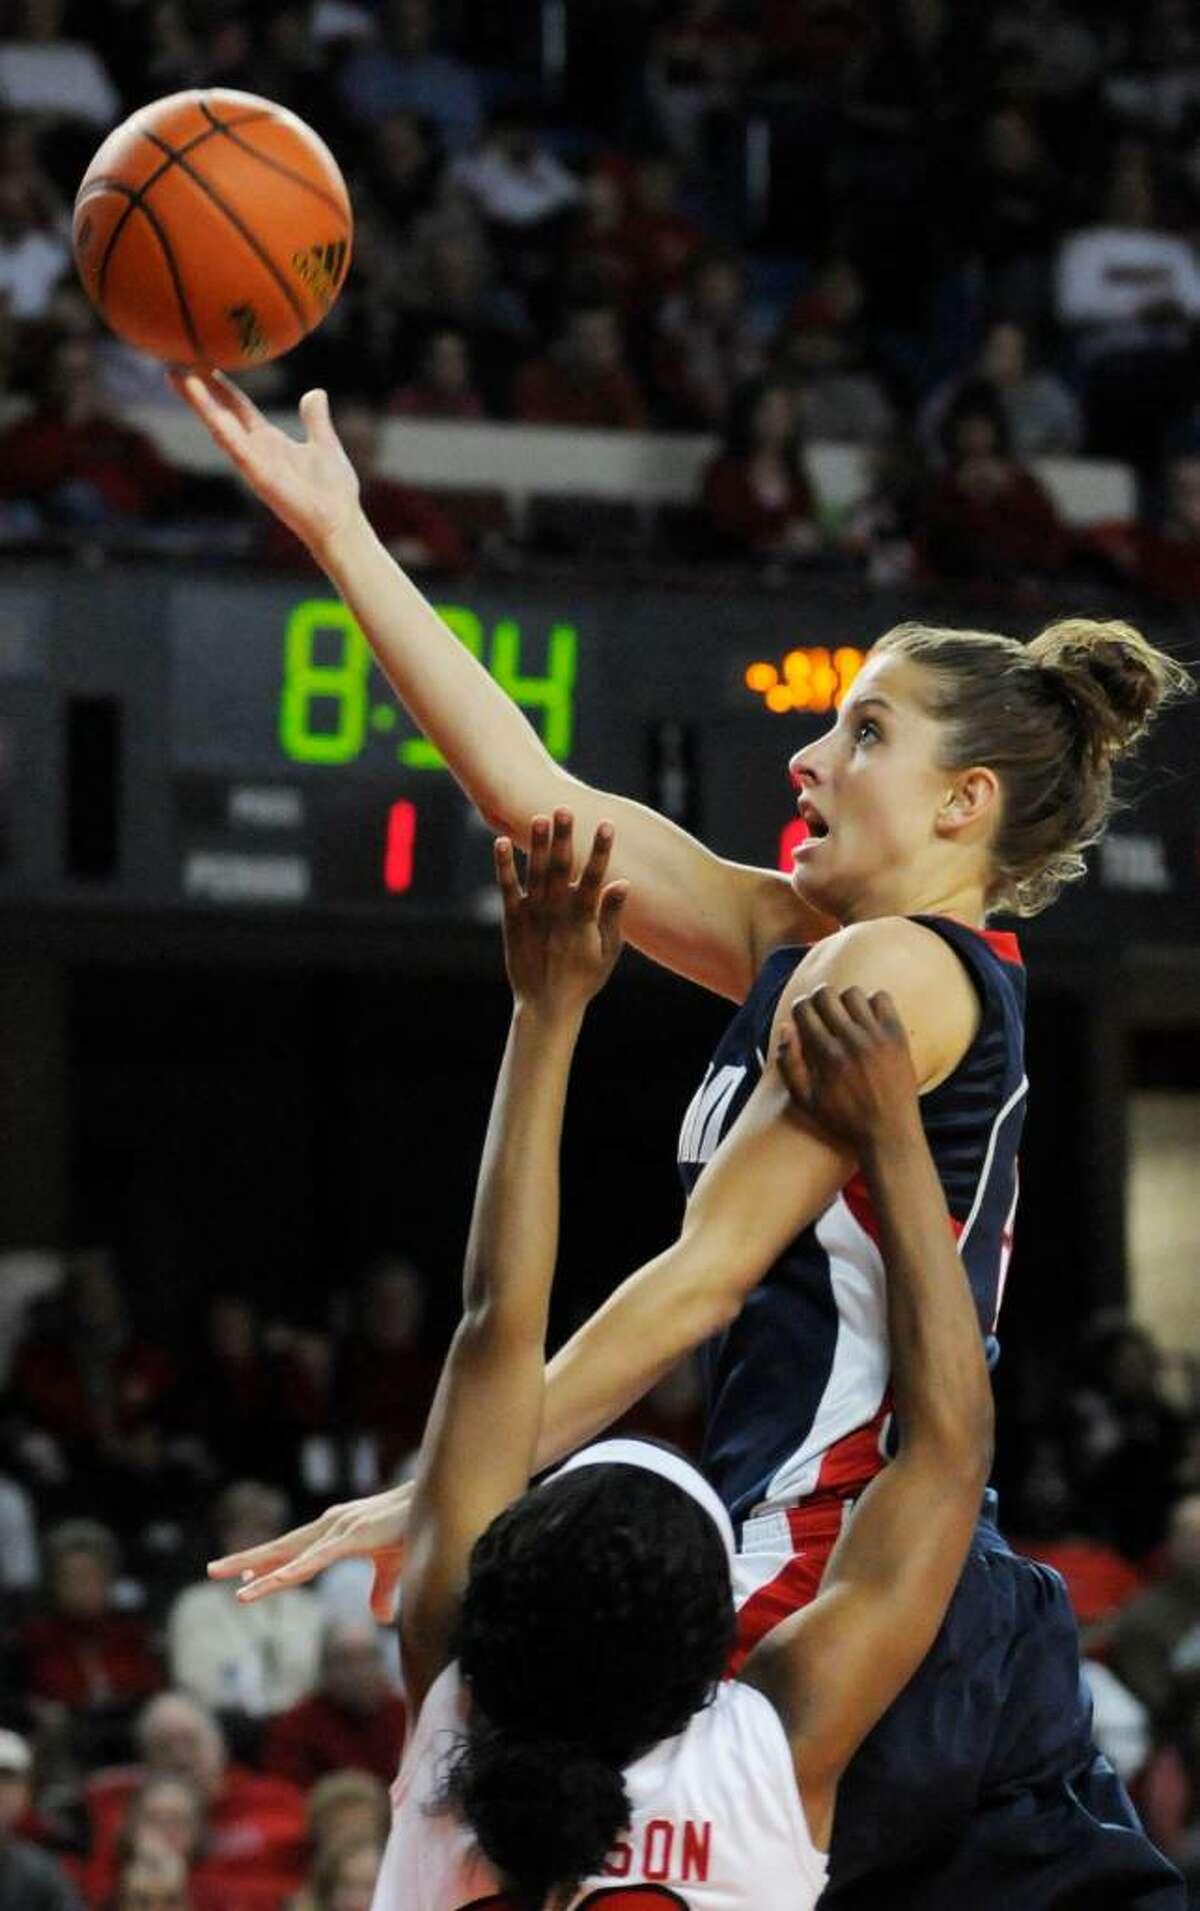 Connecticut's Caroline Doty, top, drives past the defense of Louisville's LaToya Johnson for a layup during the first half of their NCAA college basketball game Sunday, Feb. 7, 2010, in Louisville, Ky. Connecticut defeated Louisville 84-38. (AP Photo/Timothy D. Easley)